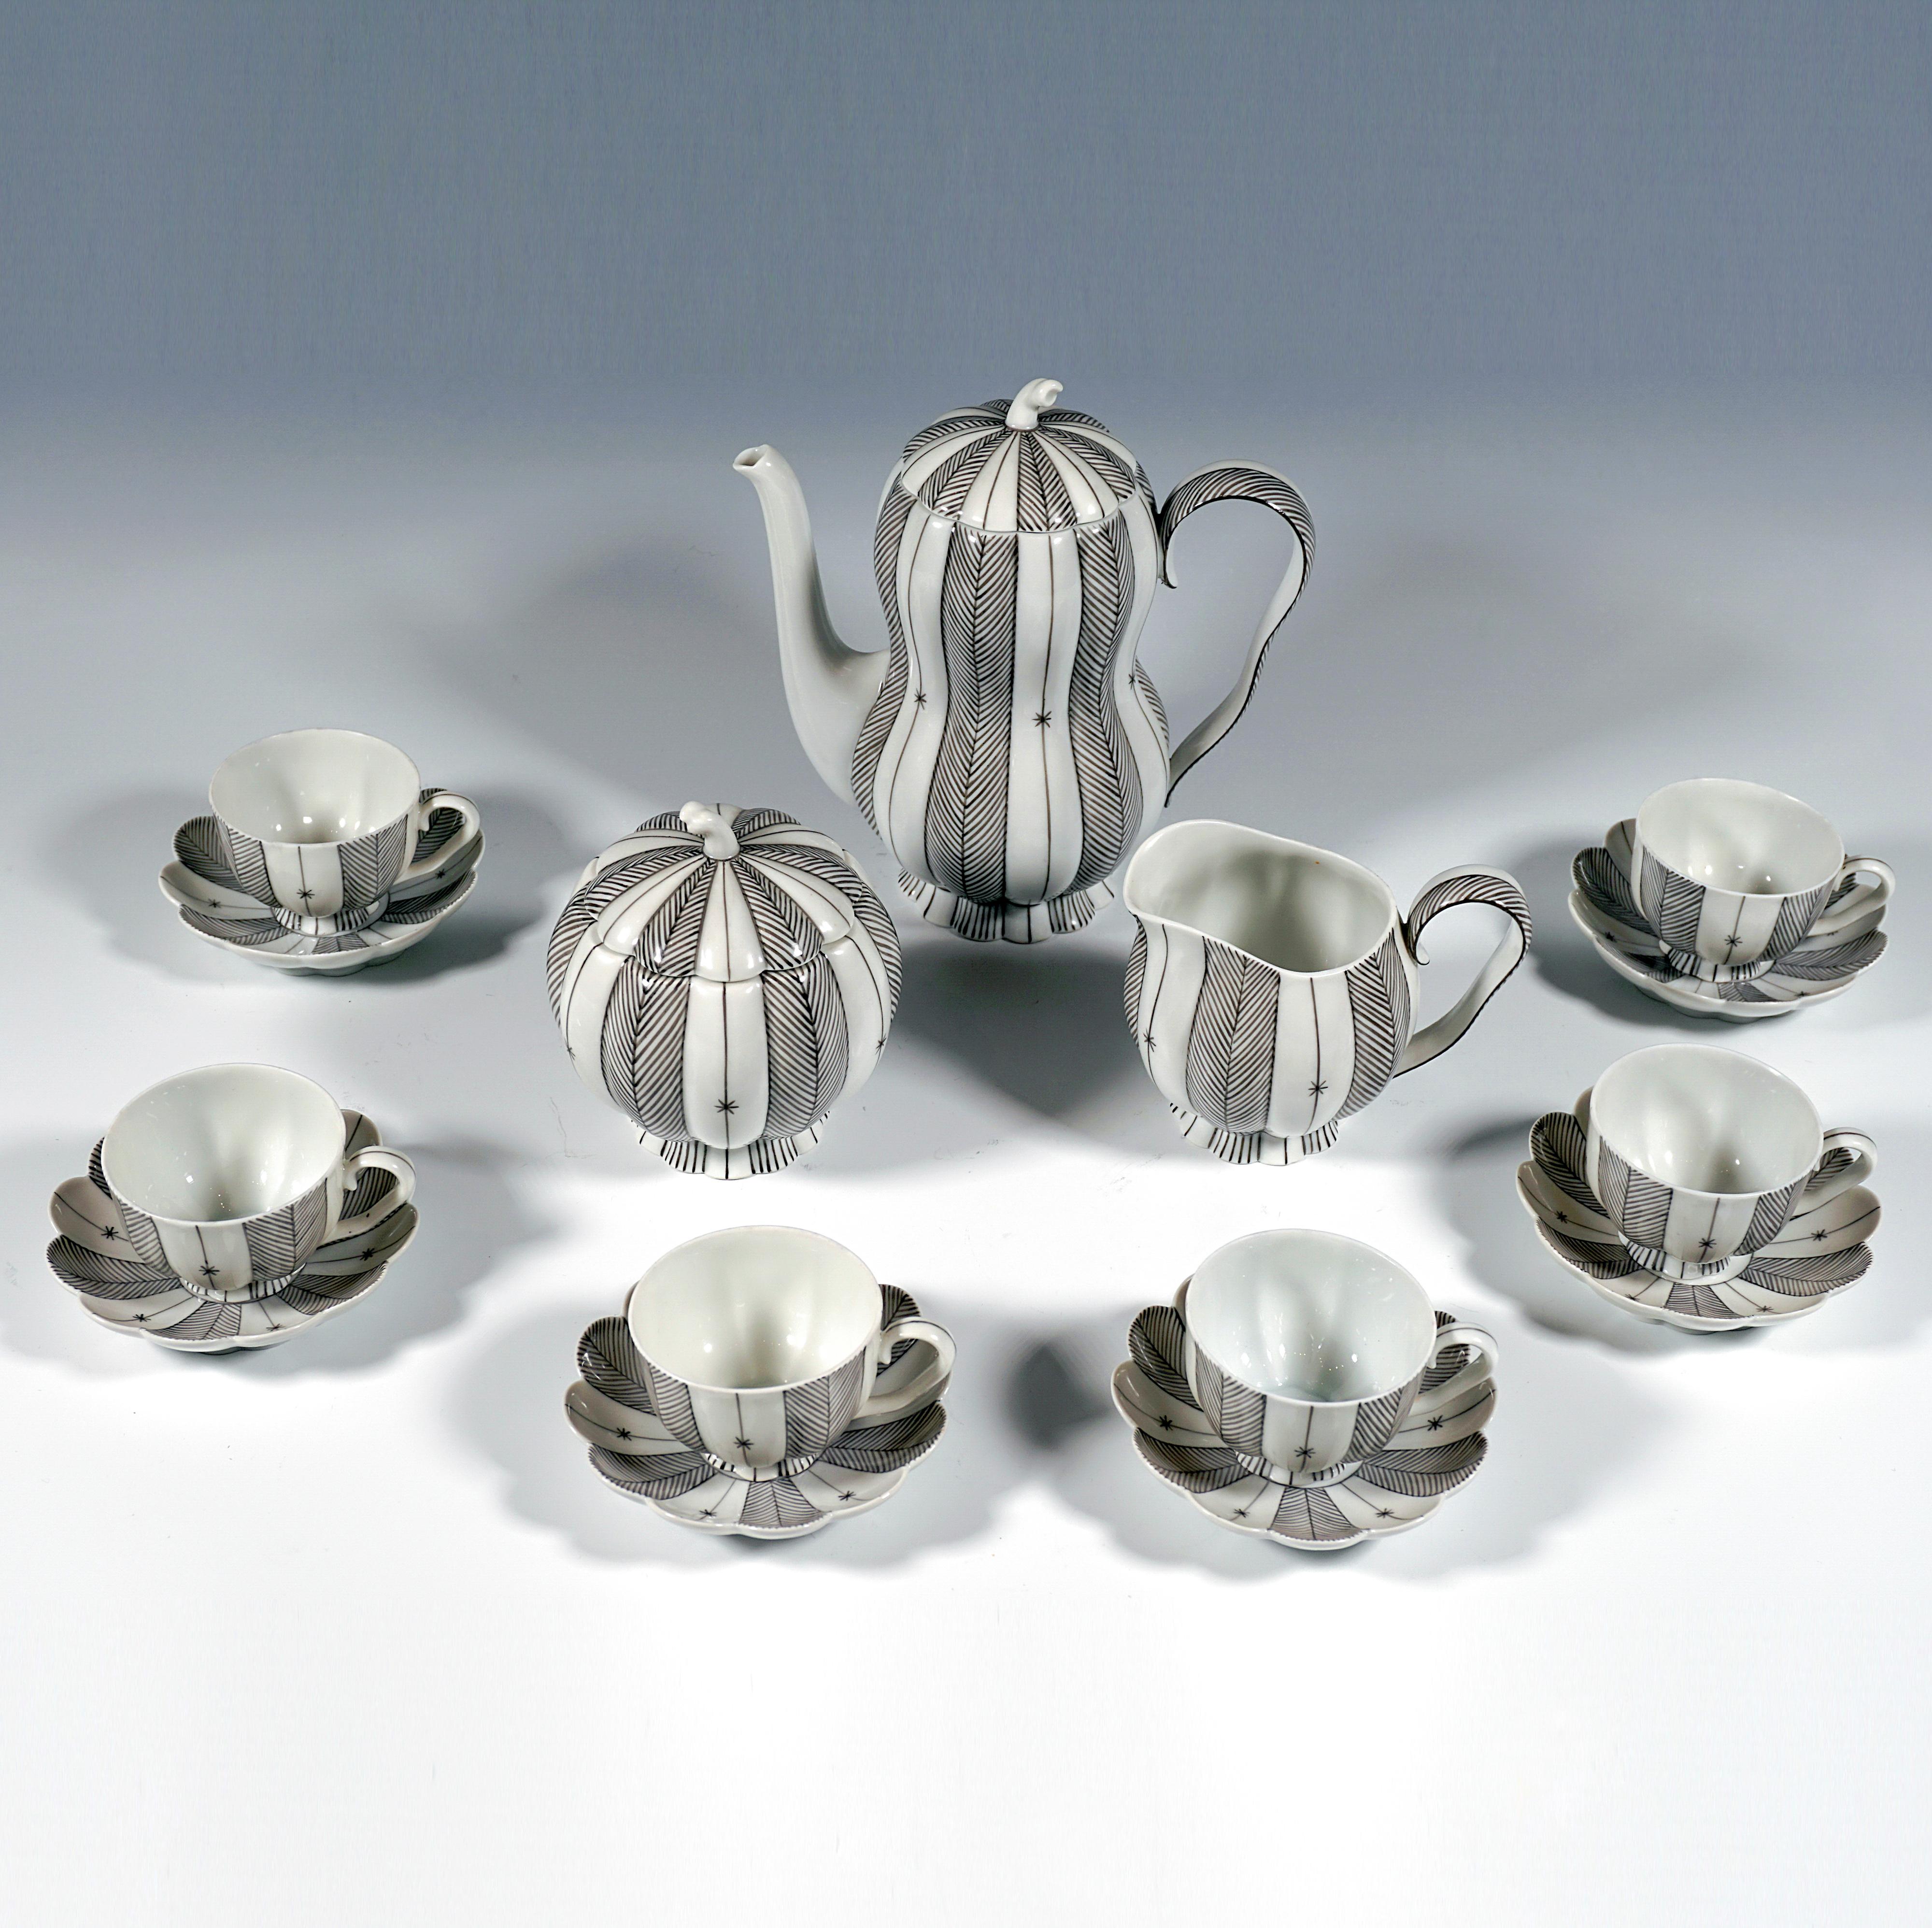 In 1929, Josef Hoffmann, founder of the legendary 'Wiener Werkstätte, designed this world-famous mocha service. Hoffmann was one of the greatest designers of the 20th century and a member of the 'Vienna Secession' with 
artists such as Gustav Klimt,